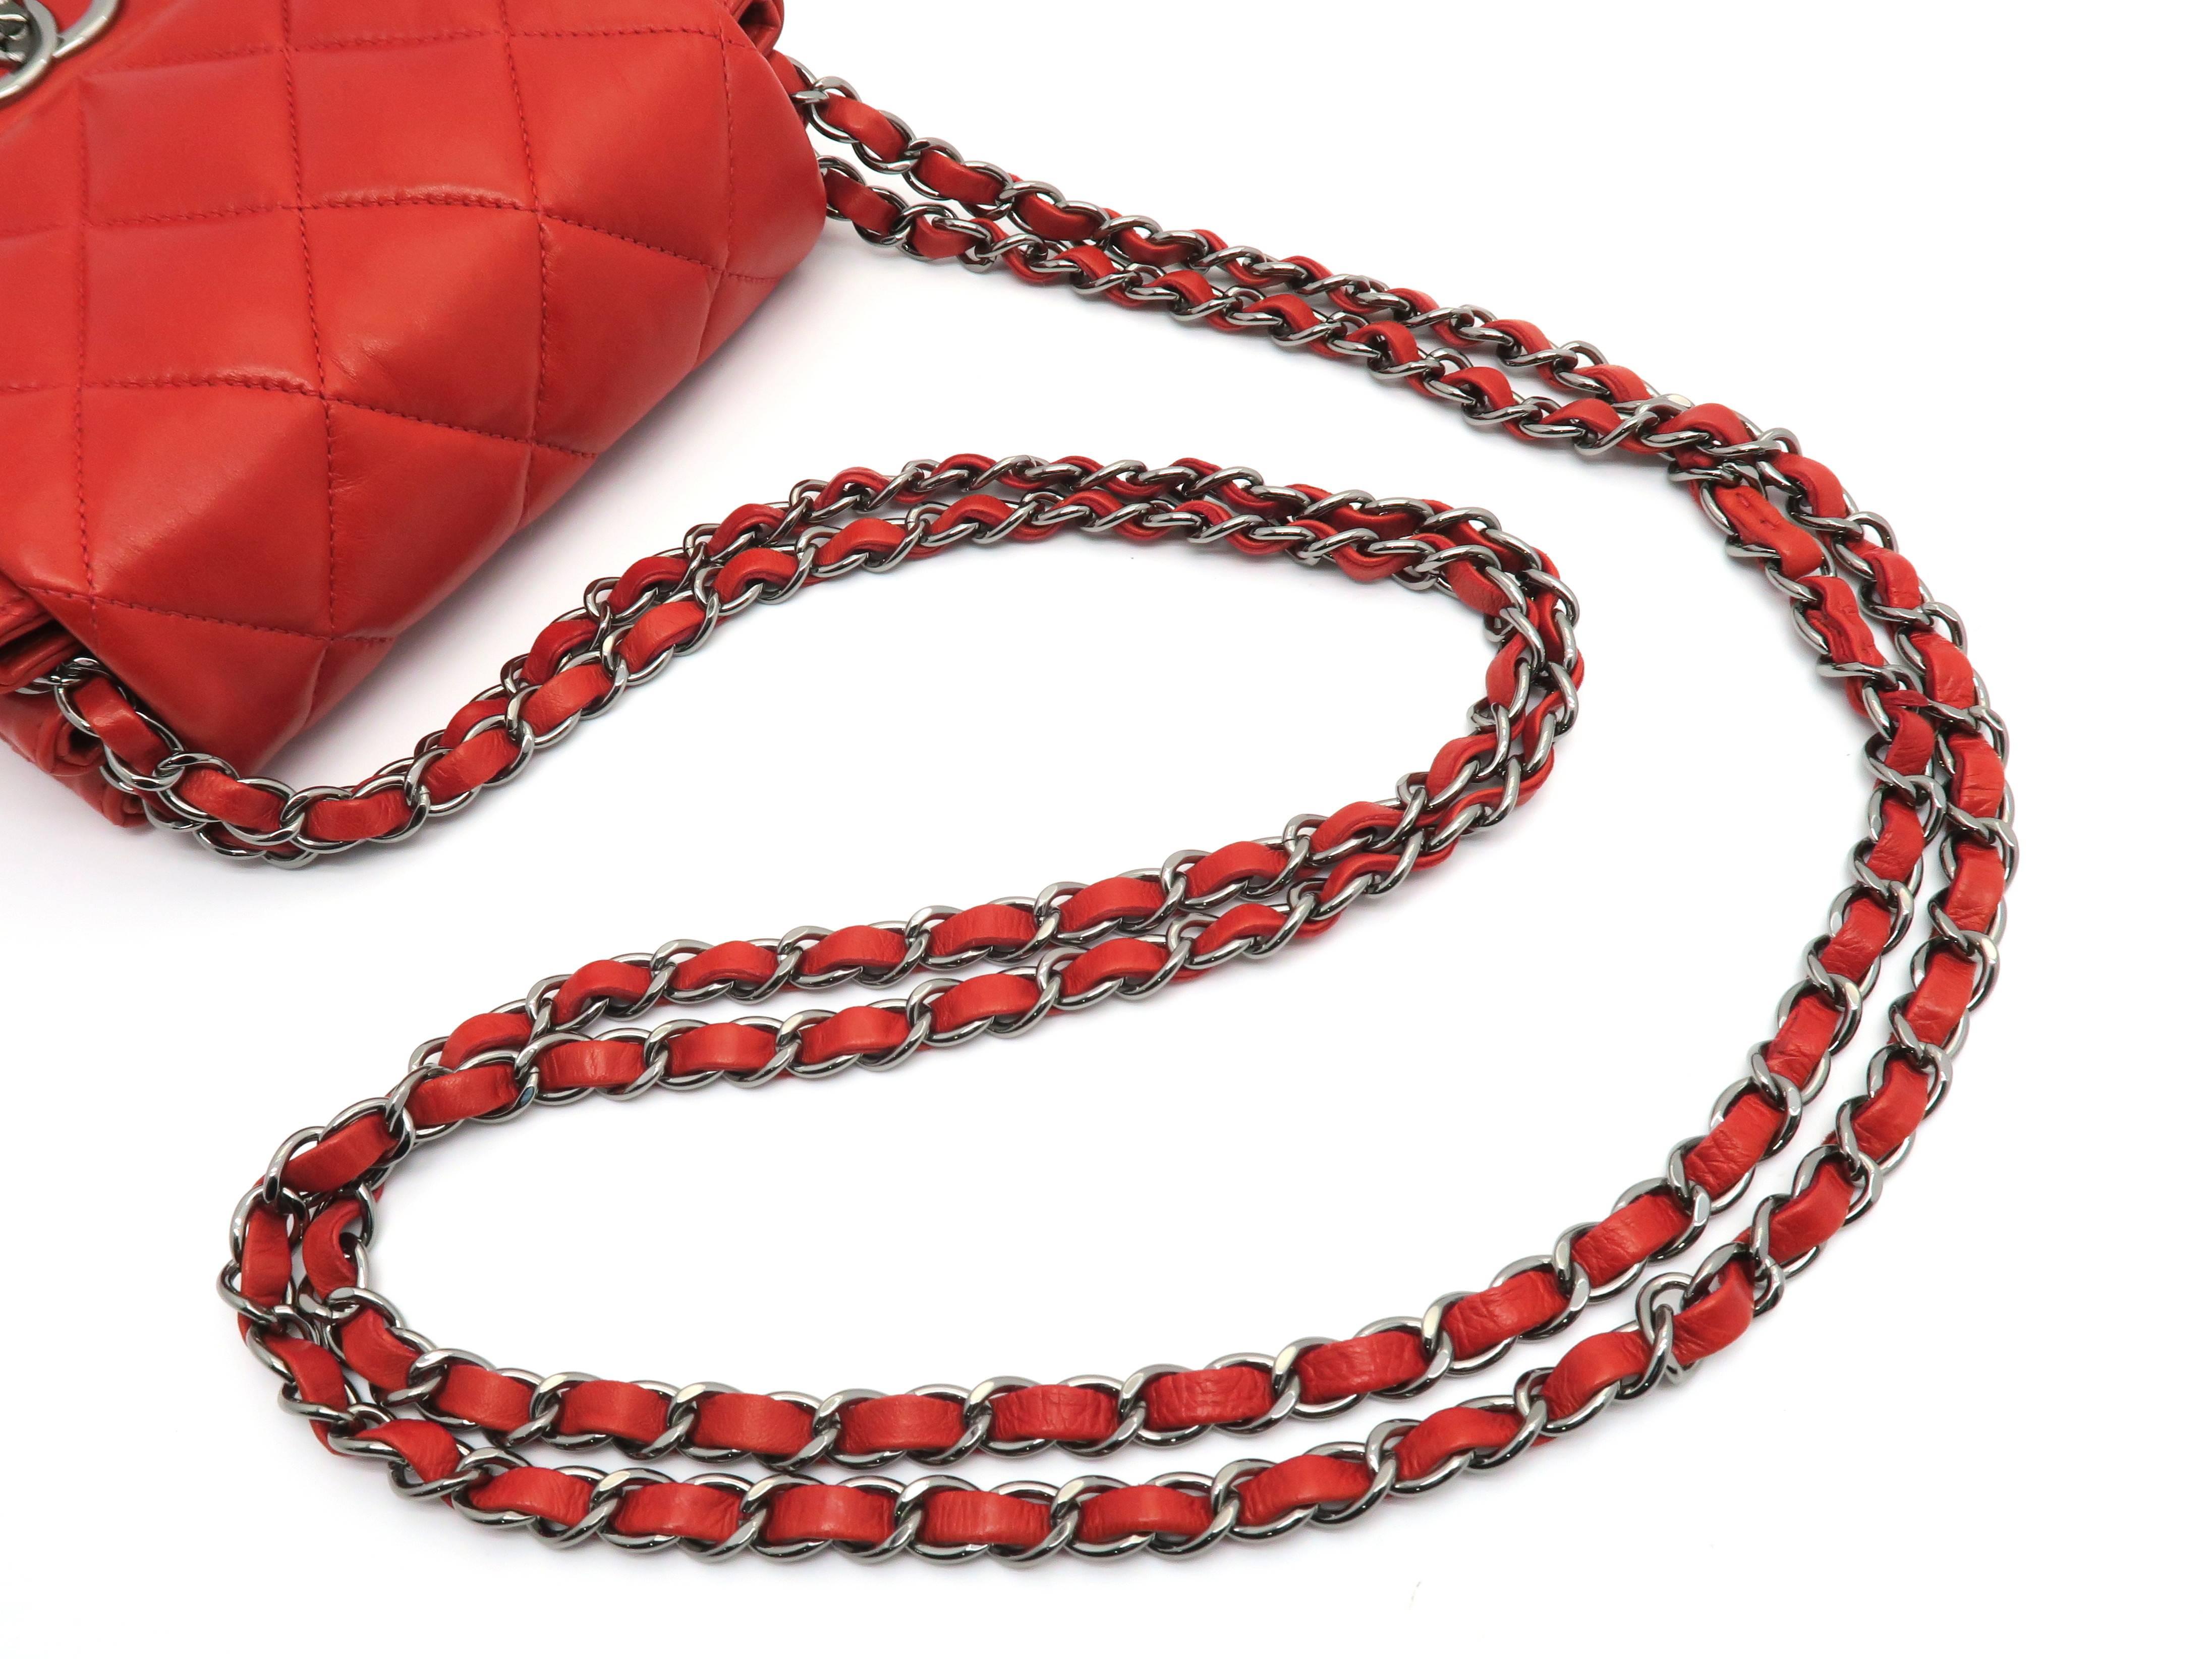 Chanel Red Quilted Calfskin Leather SHW Chain Shoulder Bag 2